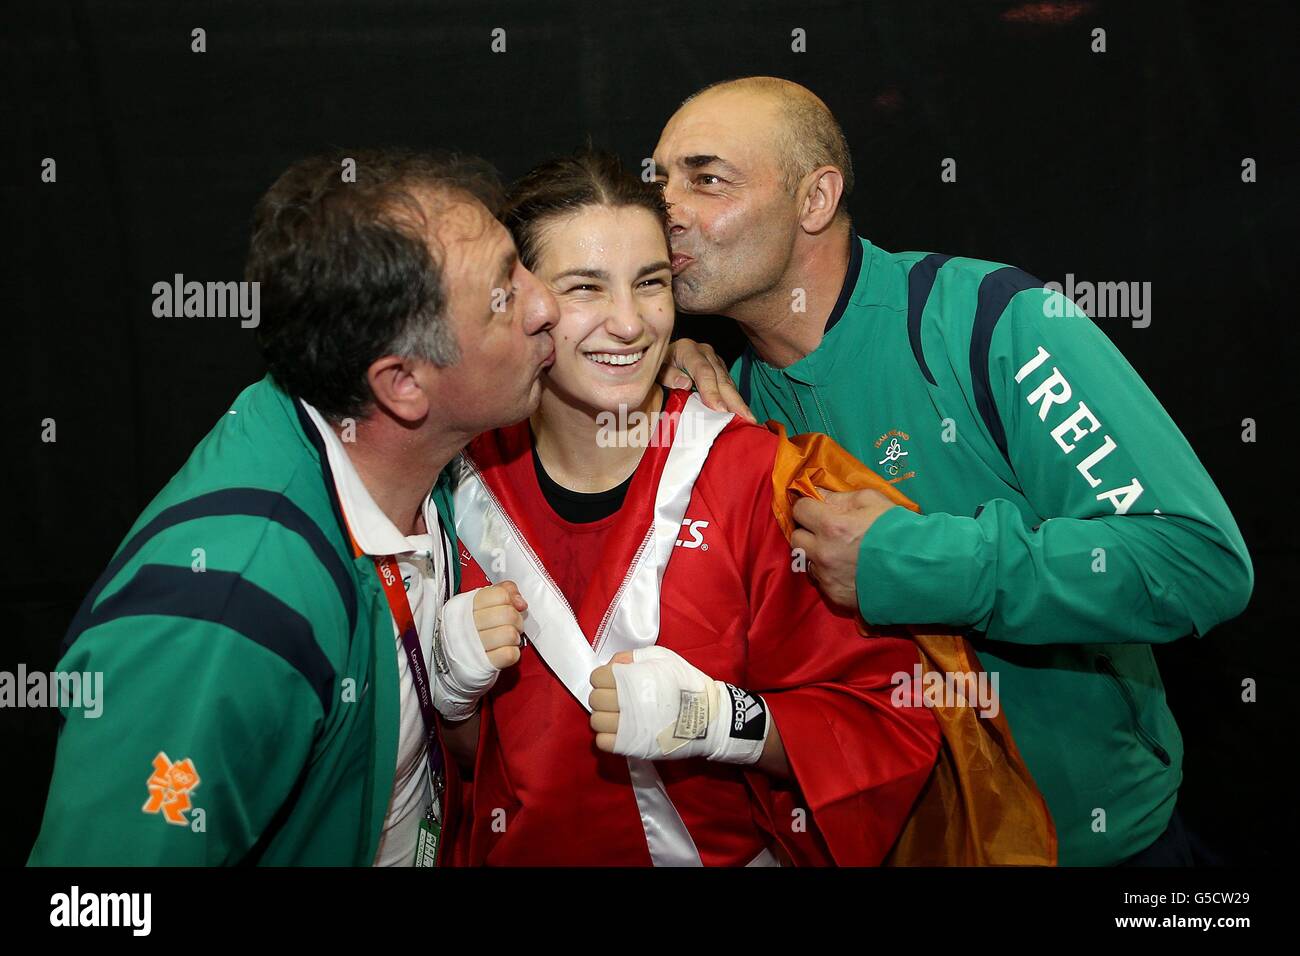 Ireland's Katie Taylor is congratulated by her father and coach Peter Taylor (right) and assistant coach Zaur Anita (left)after her win against Tajikistan's Mavzuna Chorieva during their Women's Boxing Light (60kg) Semi Final bout at the ExCel centre, London, on the twelfth day of the London 2012 Olympics. Stock Photo